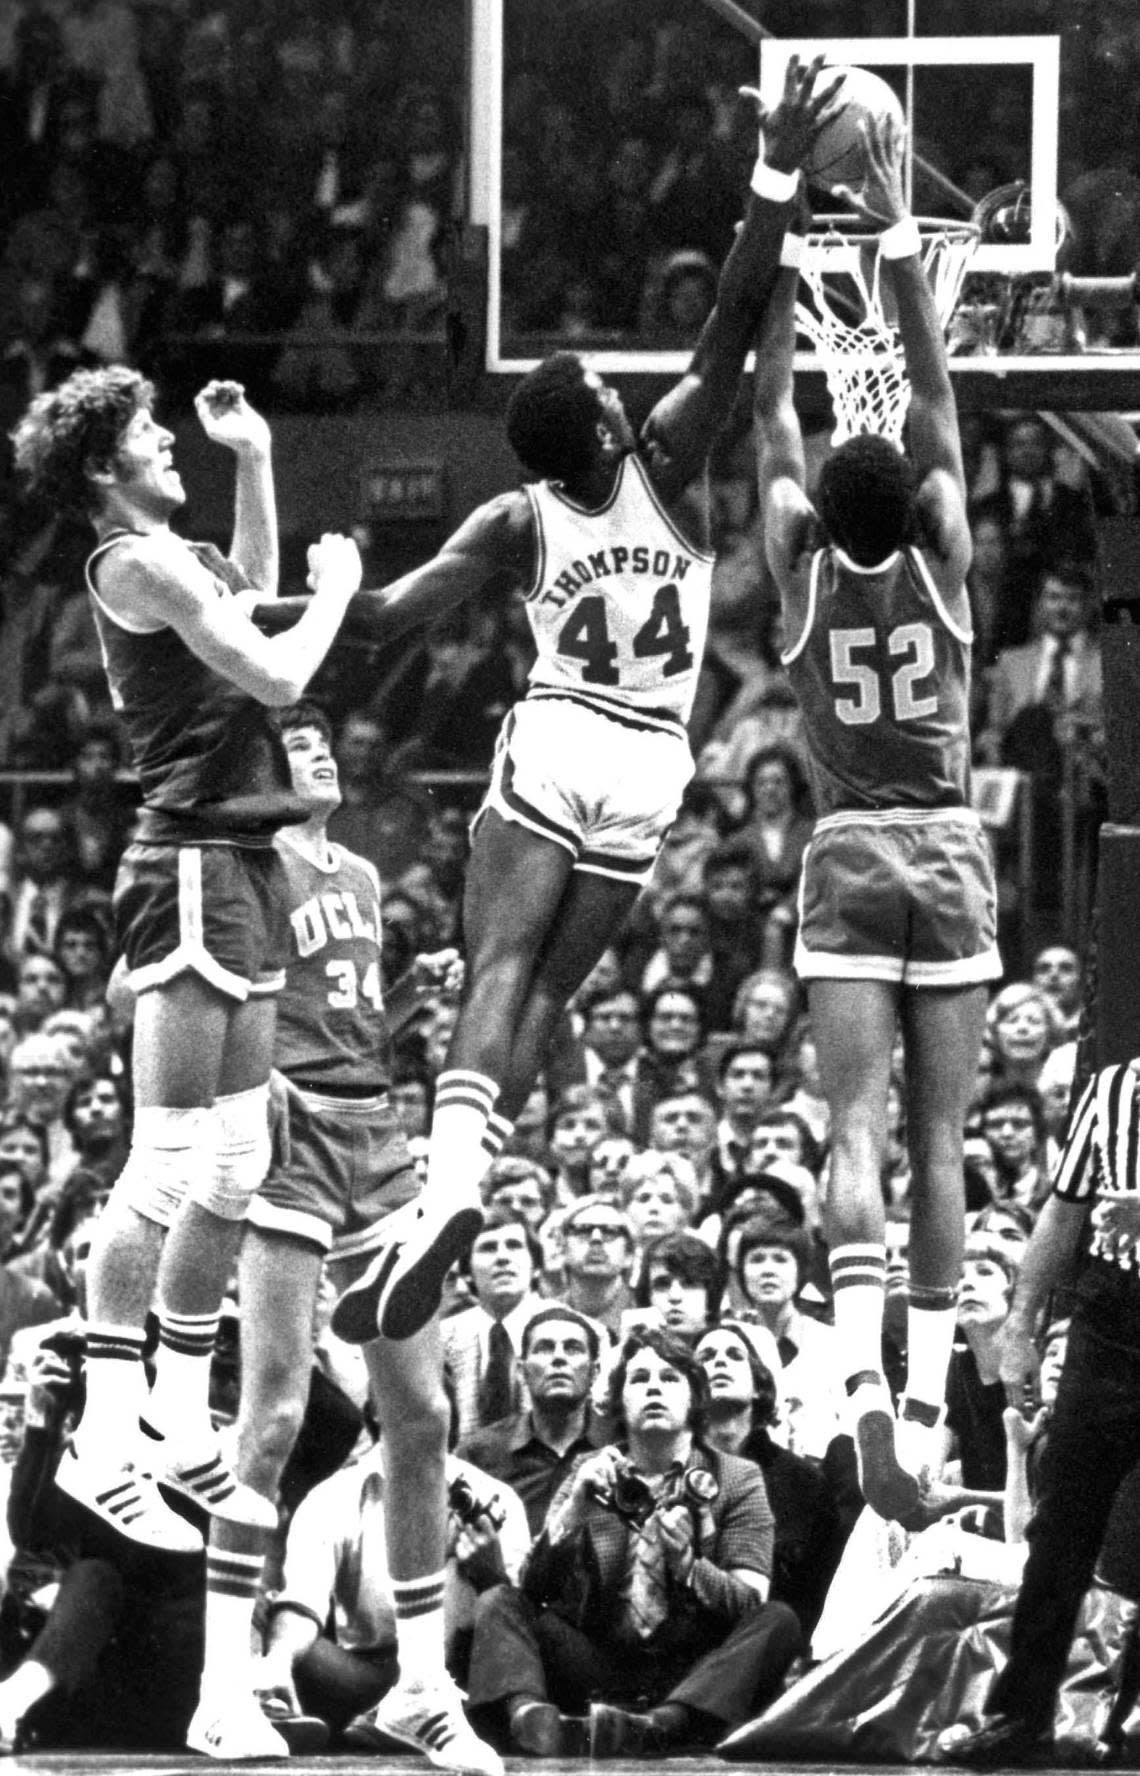 David Thompson soars above the rim to block a shot against UCLA during NCAA semifinal game in Greensboro in 1974.